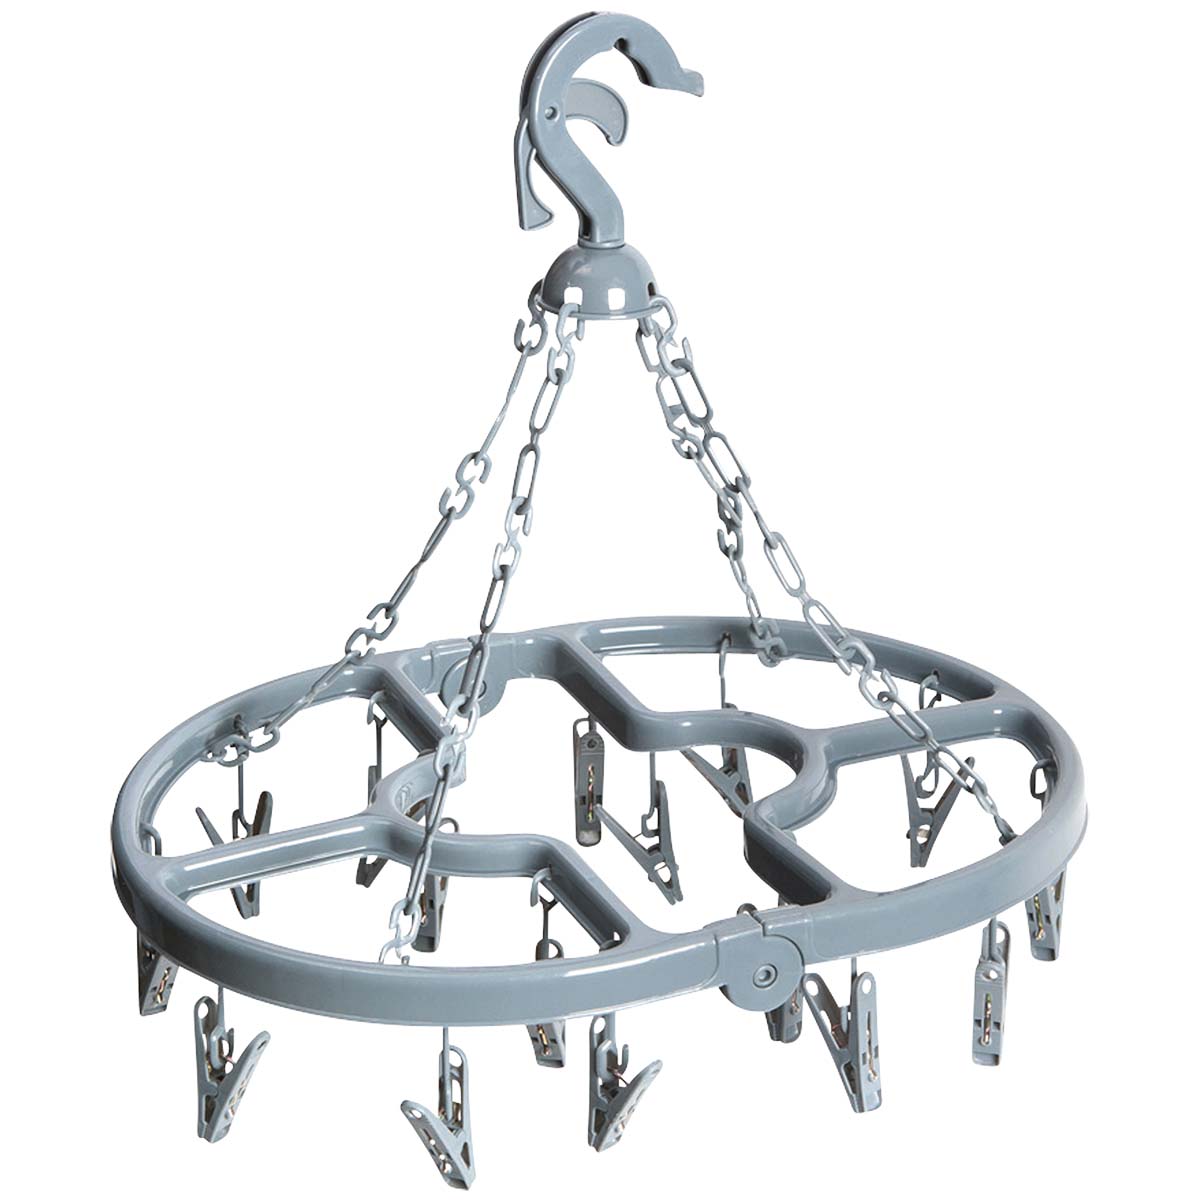 6415151 Compact collapsible drying carousel with a sturdy hook for universal mounting. Comes with 16 clothes pegs.